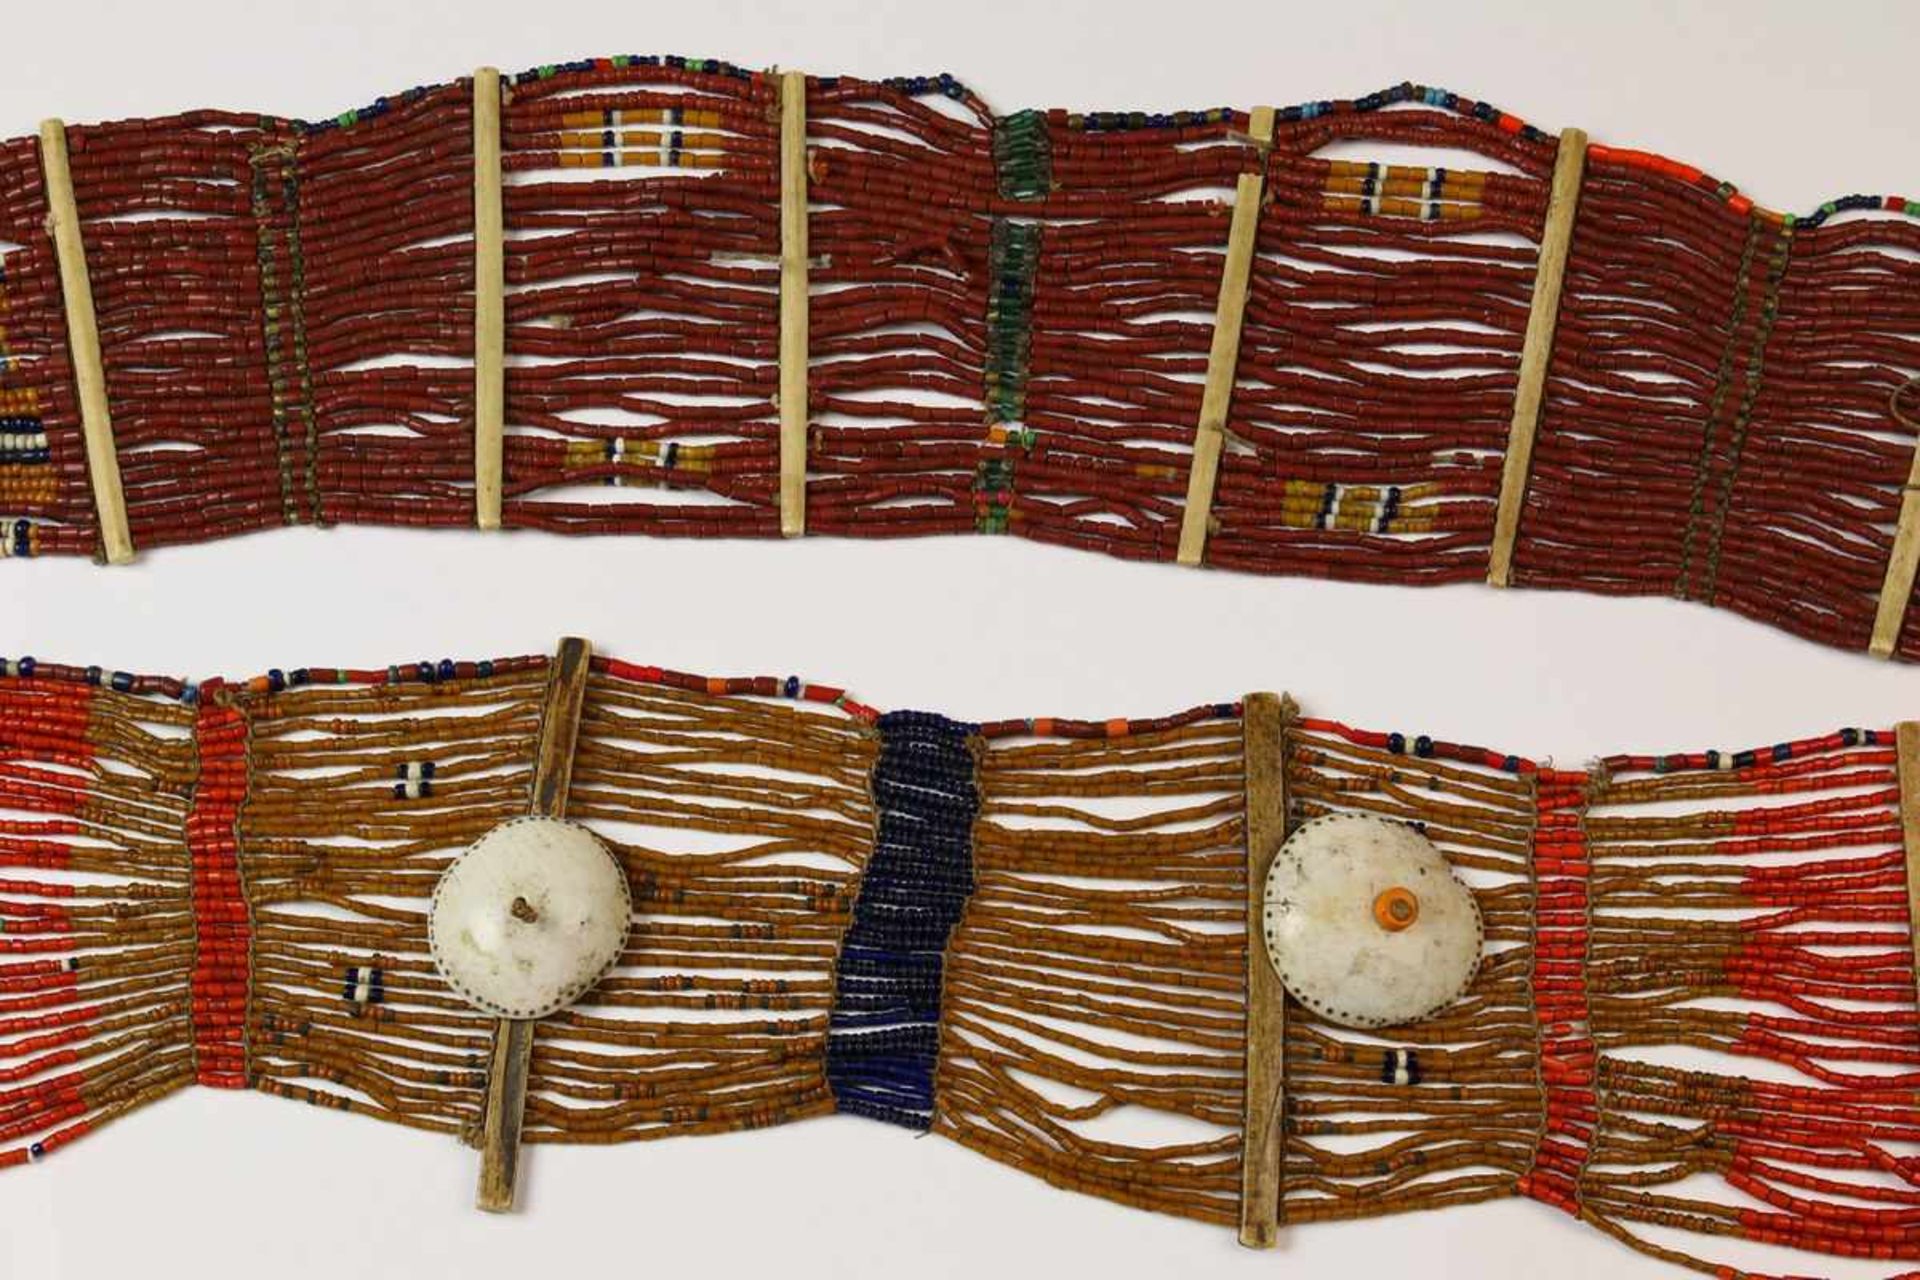 North East India, Naga, two beaded necklaces, ca. 1900,with shell ornaments and bone dividers. ;